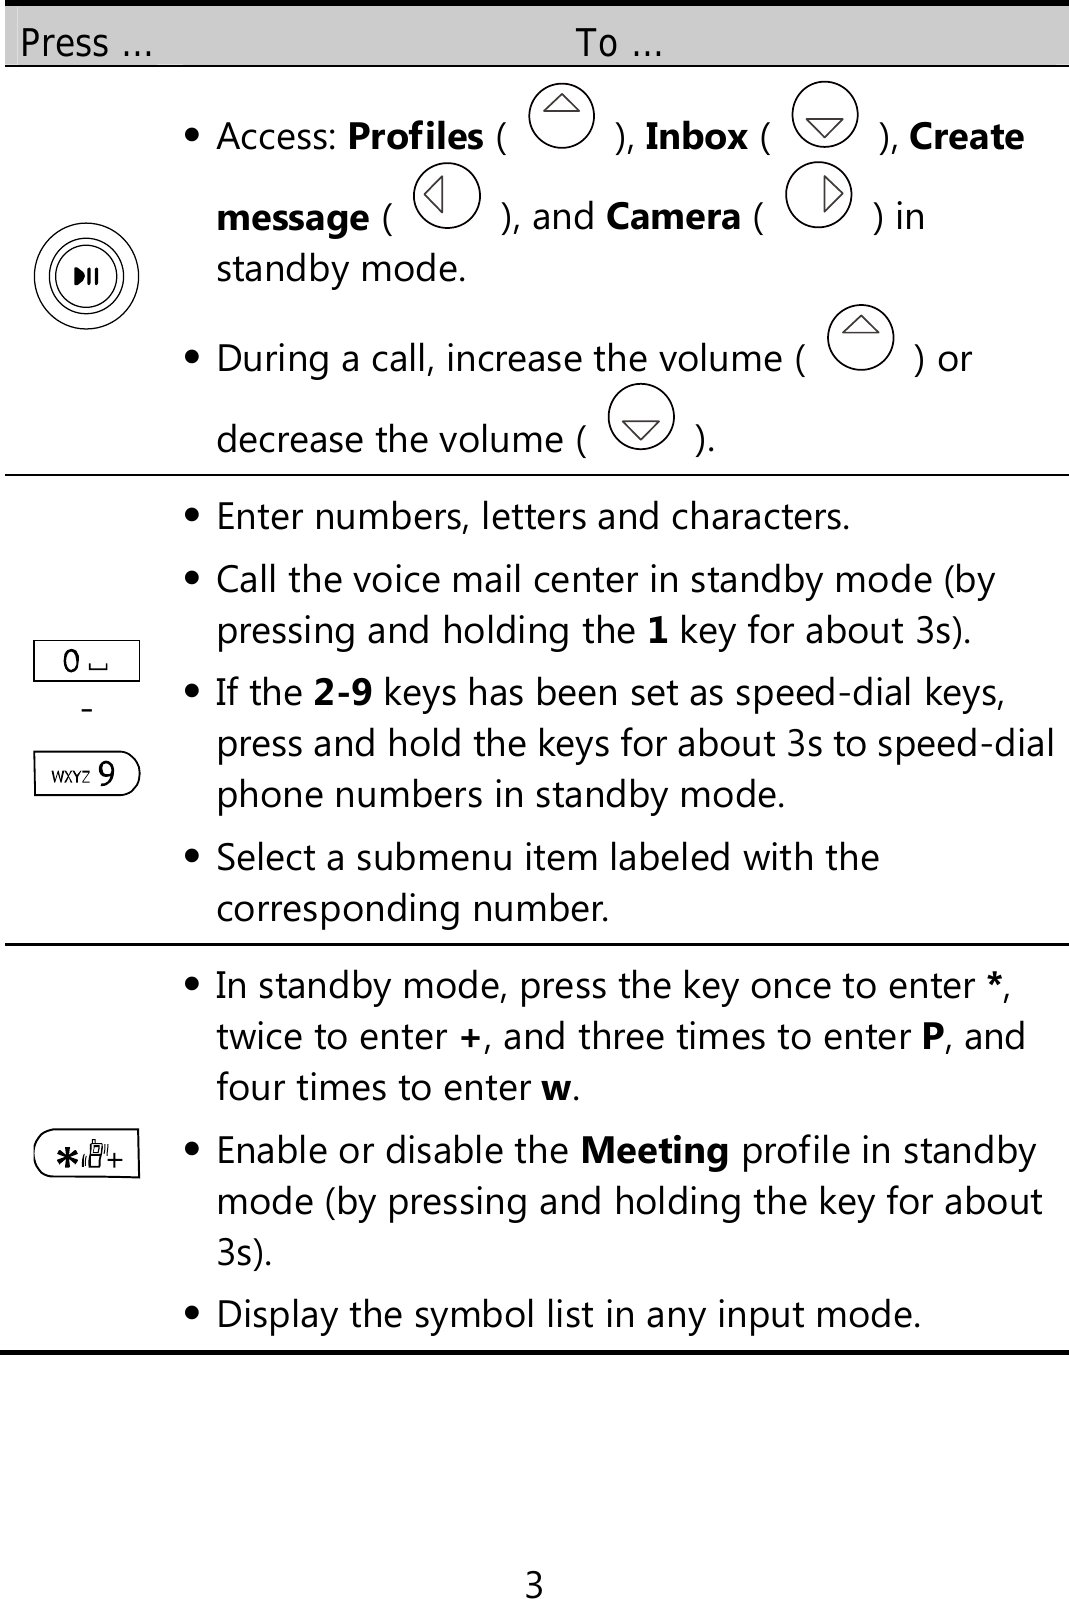 3 Press …  To …   Access: Profiles (   ), Inbox (   ), Create message (   ), and Camera (   ) in standby mode.  During a call, increase the volume (   ) or decrease the volume (   ).  -   Enter numbers, letters and characters.  Call the voice mail center in standby mode (by pressing and holding the 1 key for about 3s).  If the 2-9 keys has been set as speed-dial keys, press and hold the keys for about 3s to speed-dial phone numbers in standby mode.  Select a submenu item labeled with the corresponding number.   In standby mode, press the key once to enter *, twice to enter +, and three times to enter P, and four times to enter w.  Enable or disable the Meeting profile in standby mode (by pressing and holding the key for about 3s).  Display the symbol list in any input mode. 